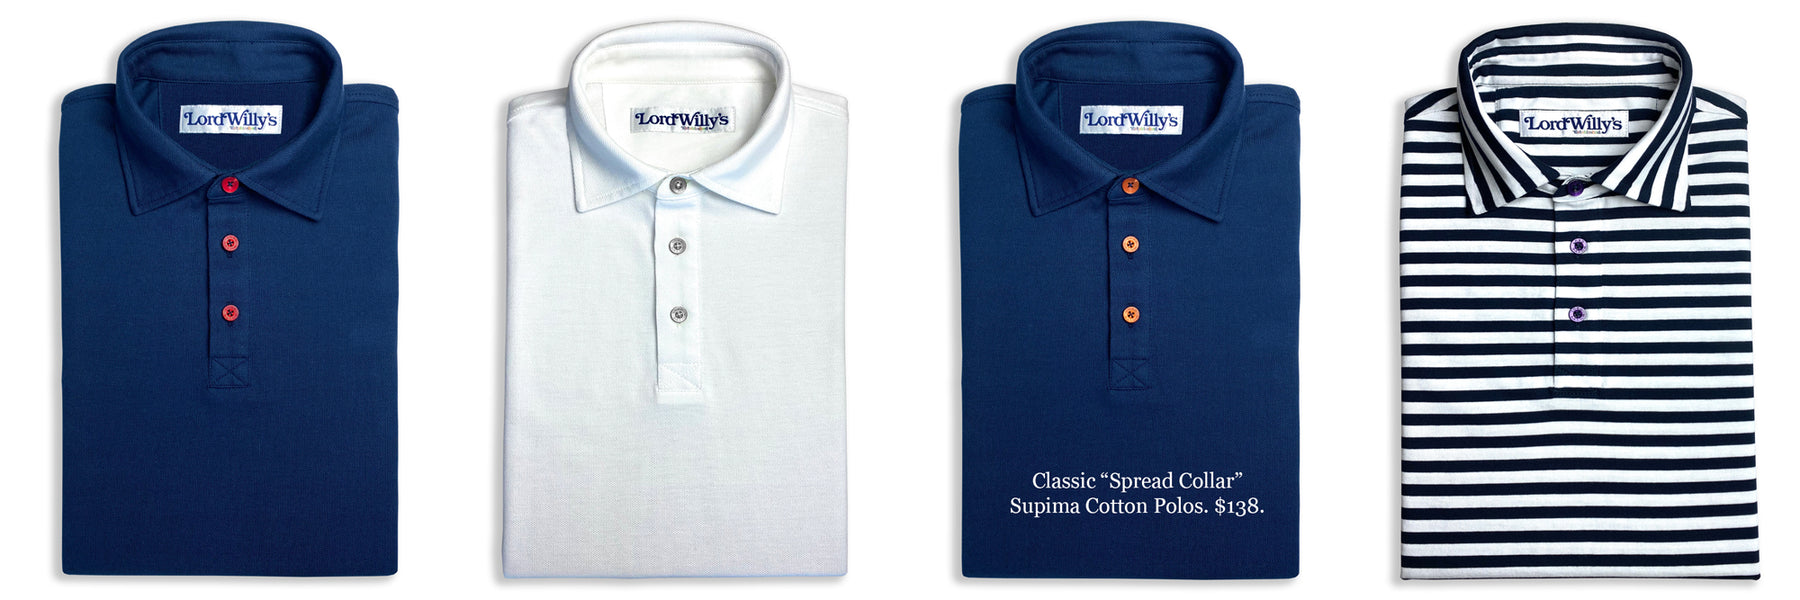 4 images of polos. captioned "Clasic Spread Collar Supima Cotton Polos. $138